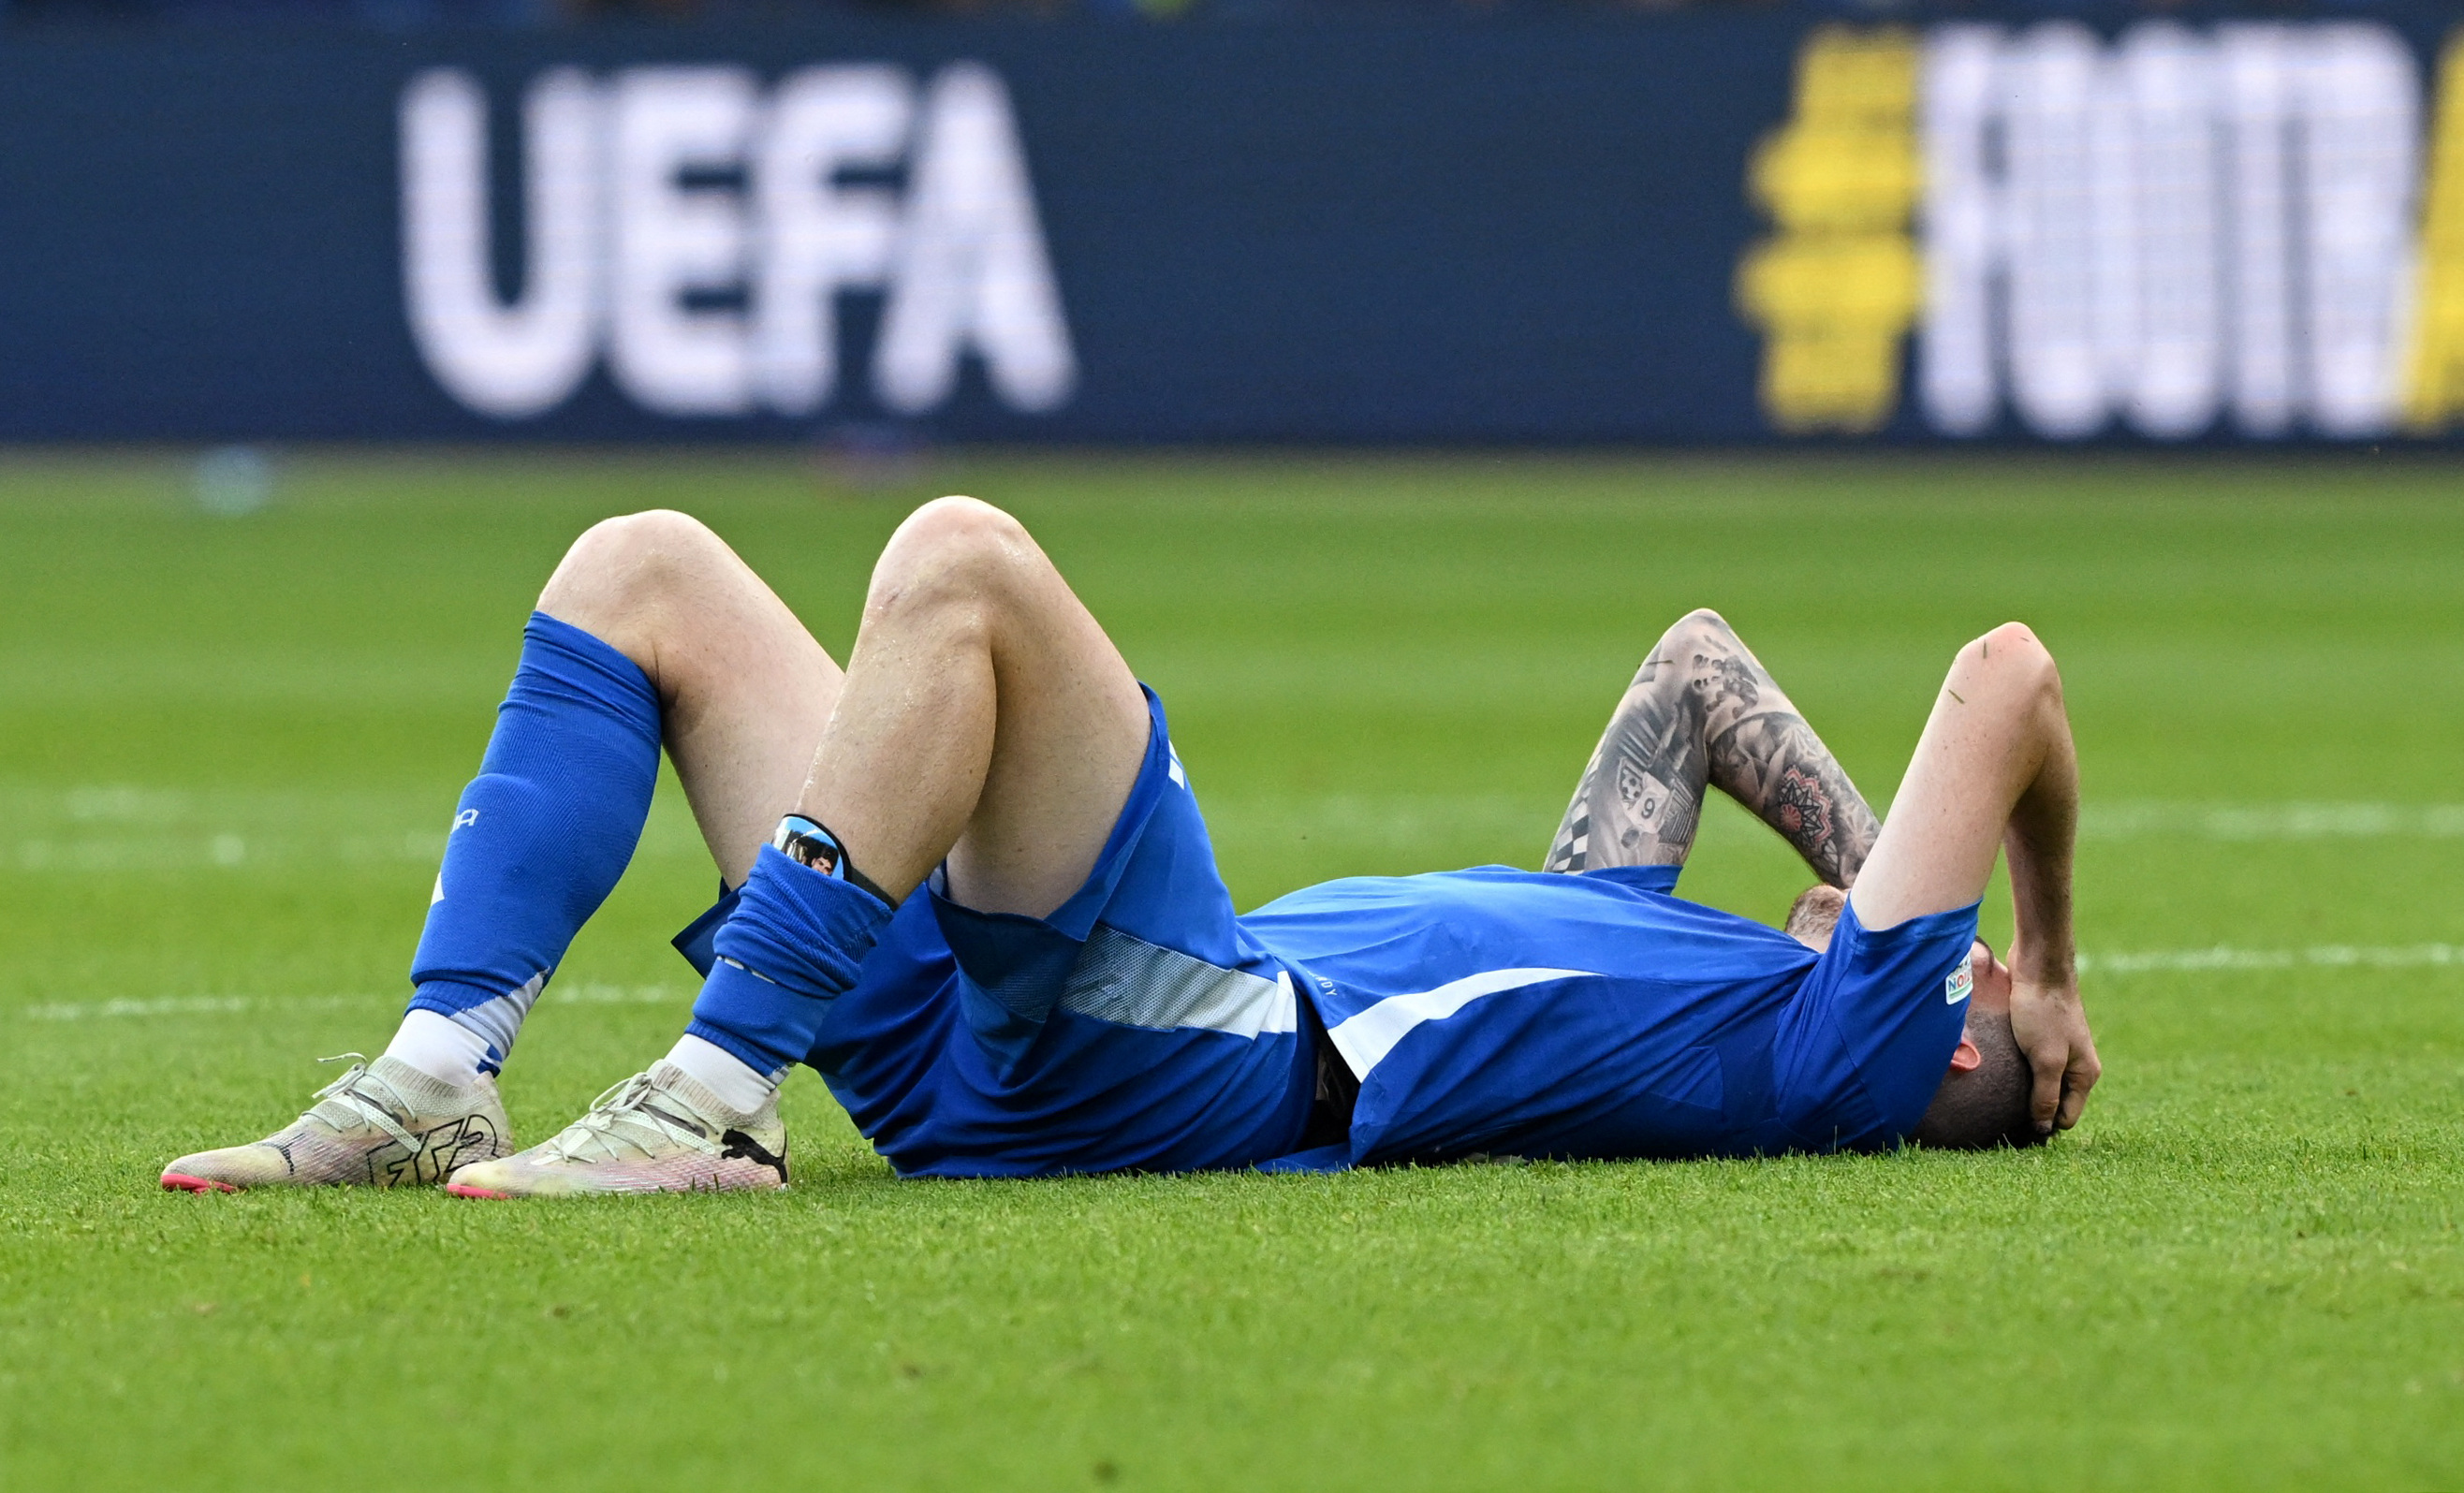 Italy’s title defence began with a bang, ends with a whimper